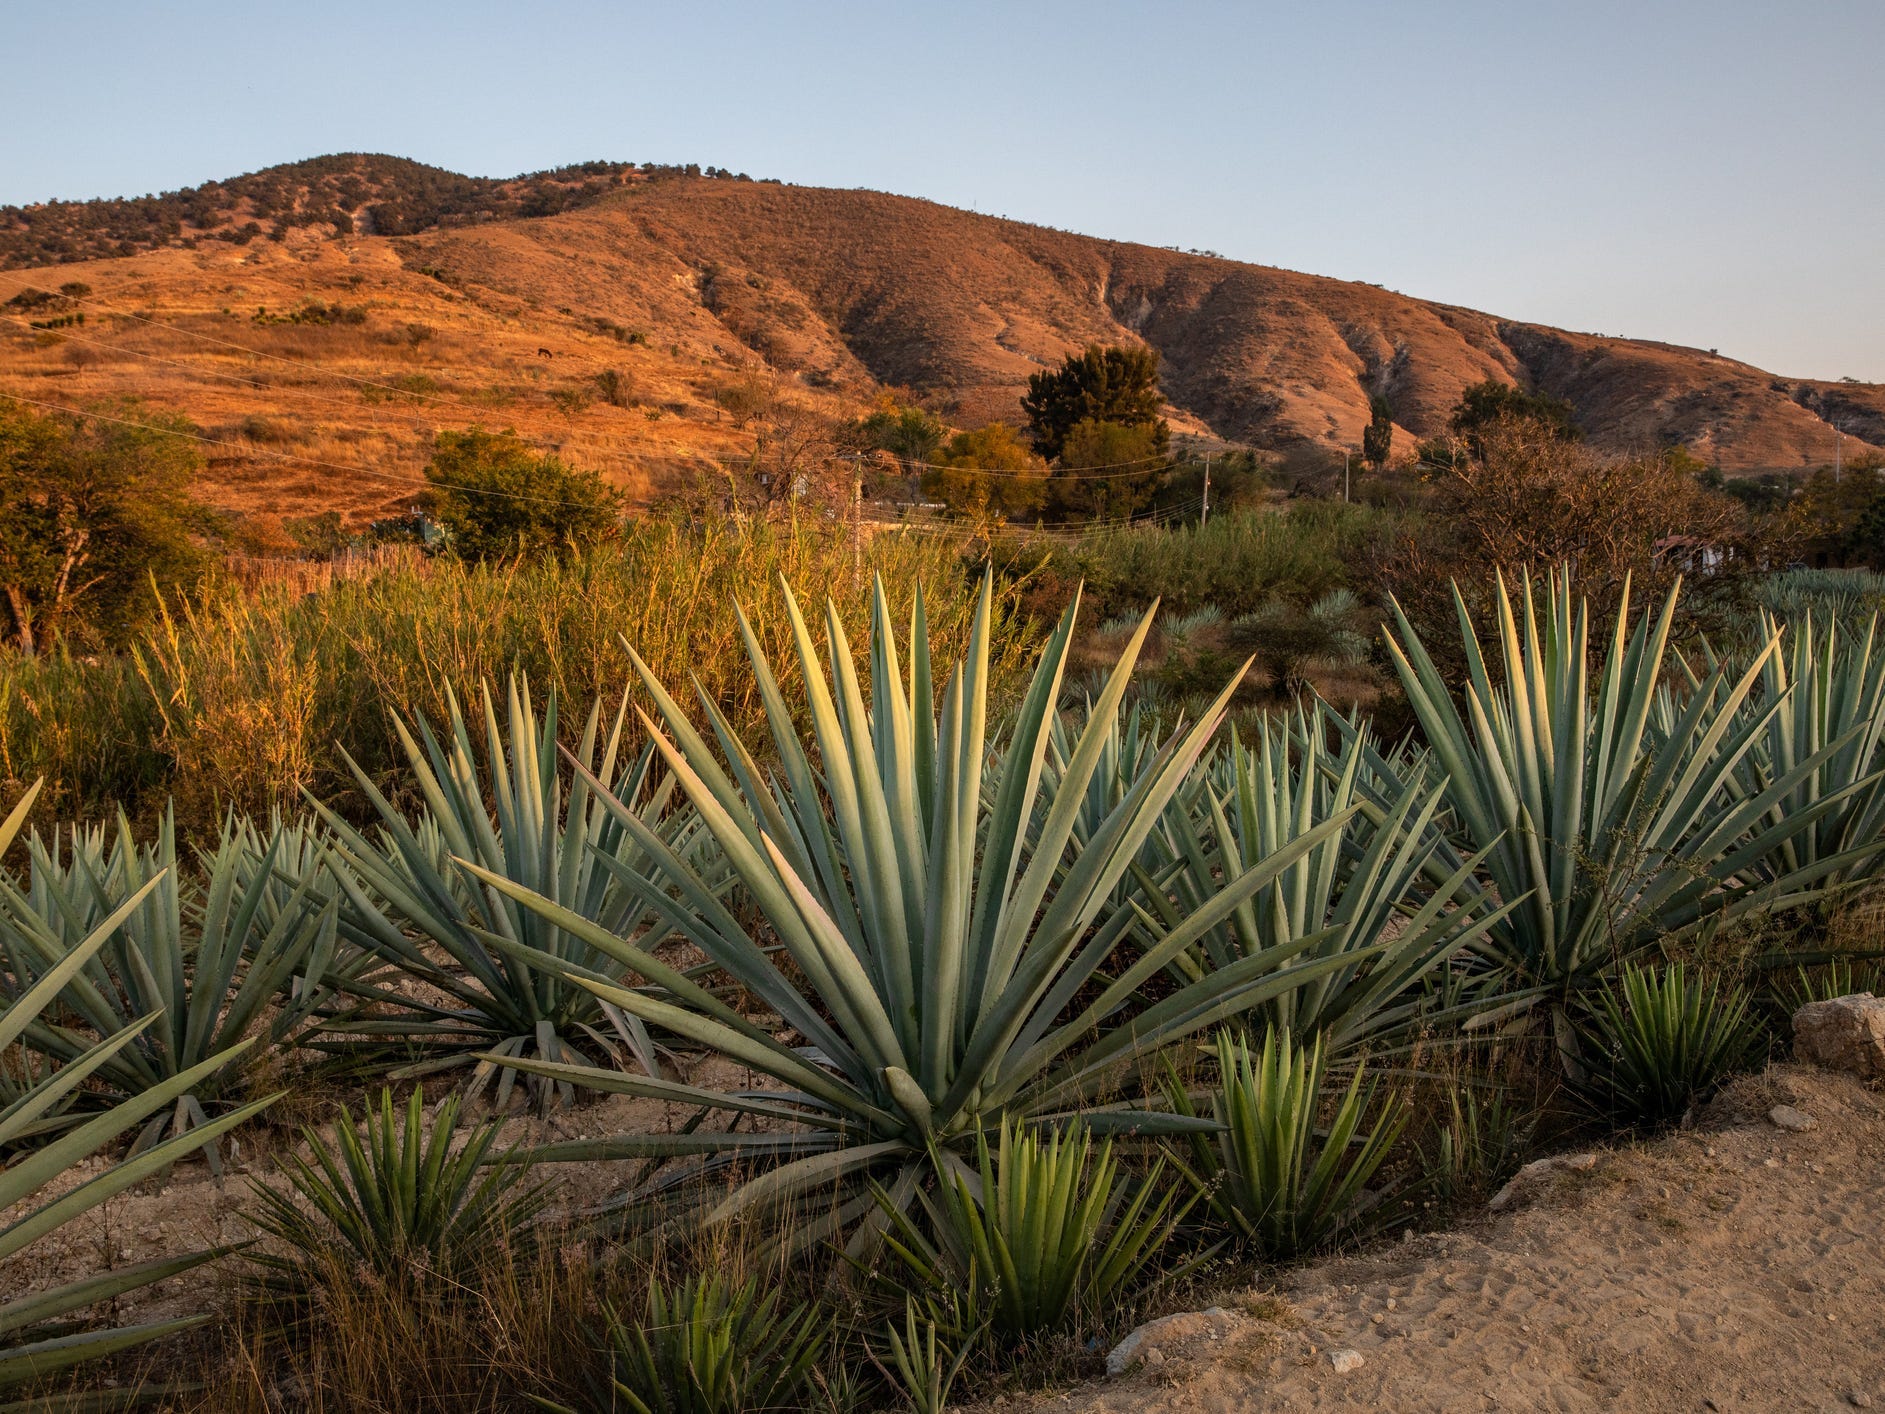 Maguey agave plant in Oaxaca, Mexico